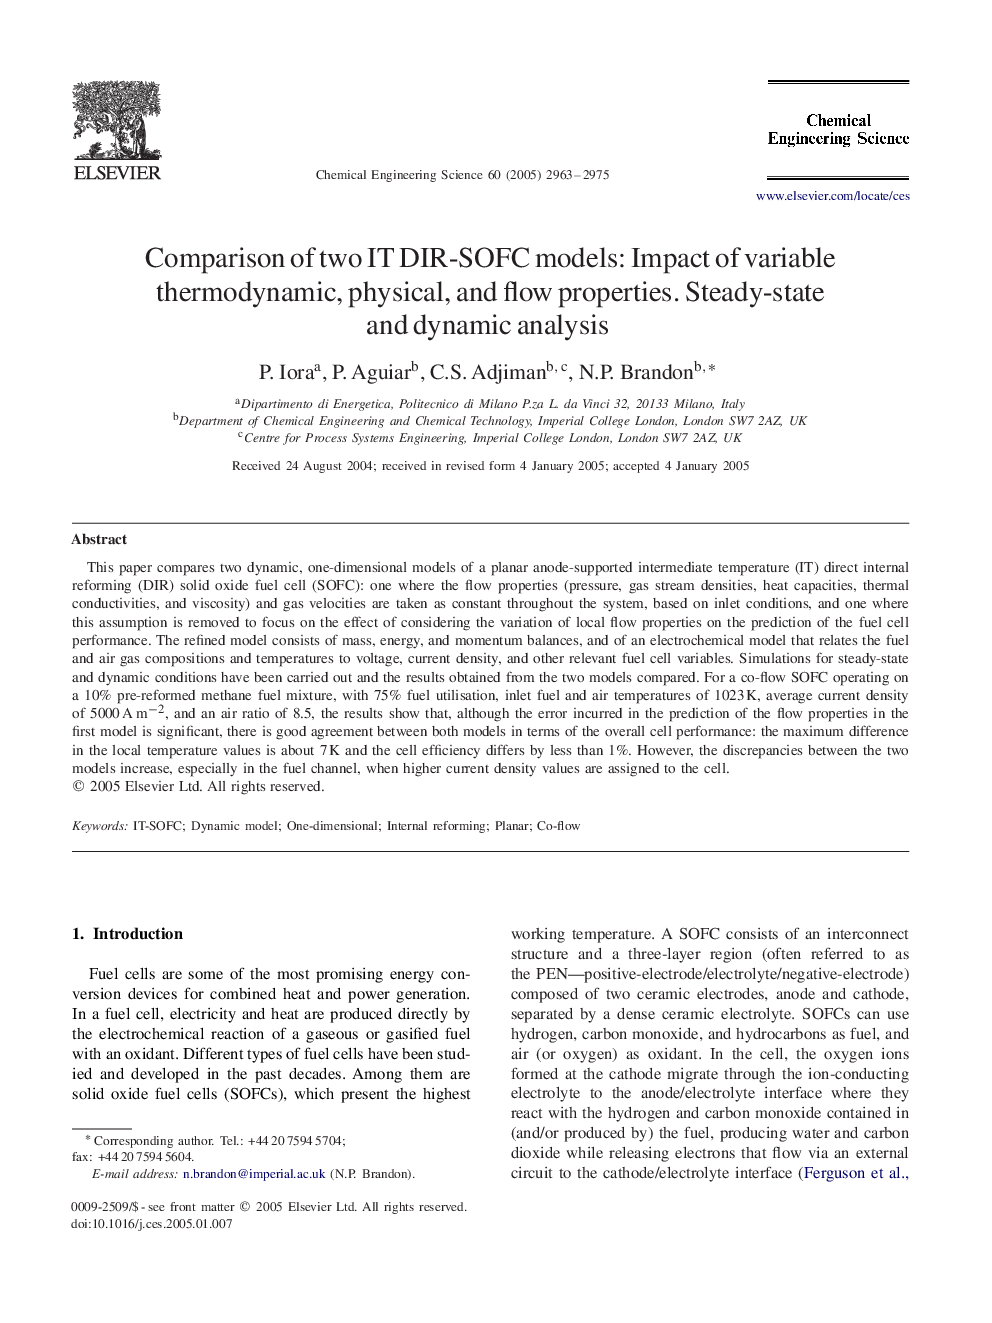 Comparison of two IT DIR-SOFC models: Impact of variable thermodynamic, physical, and flow properties. Steady-state and dynamic analysis